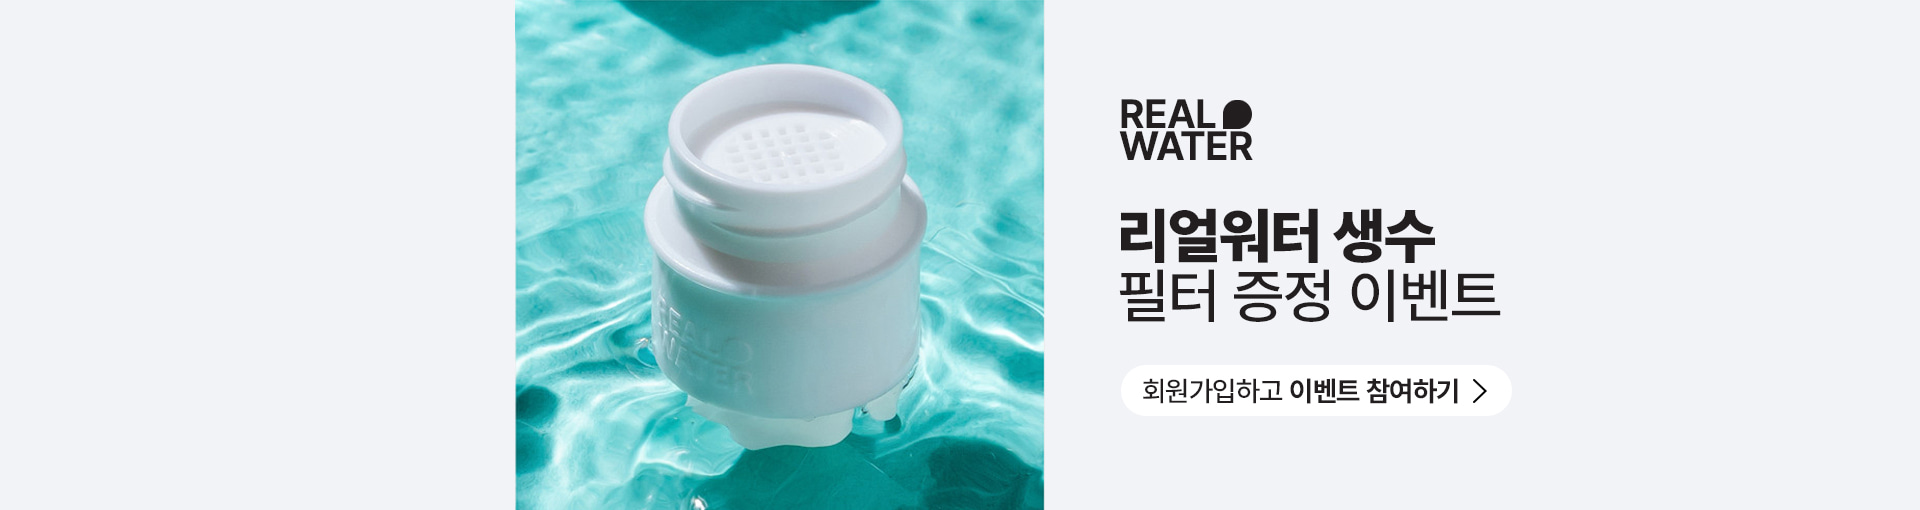 realwater